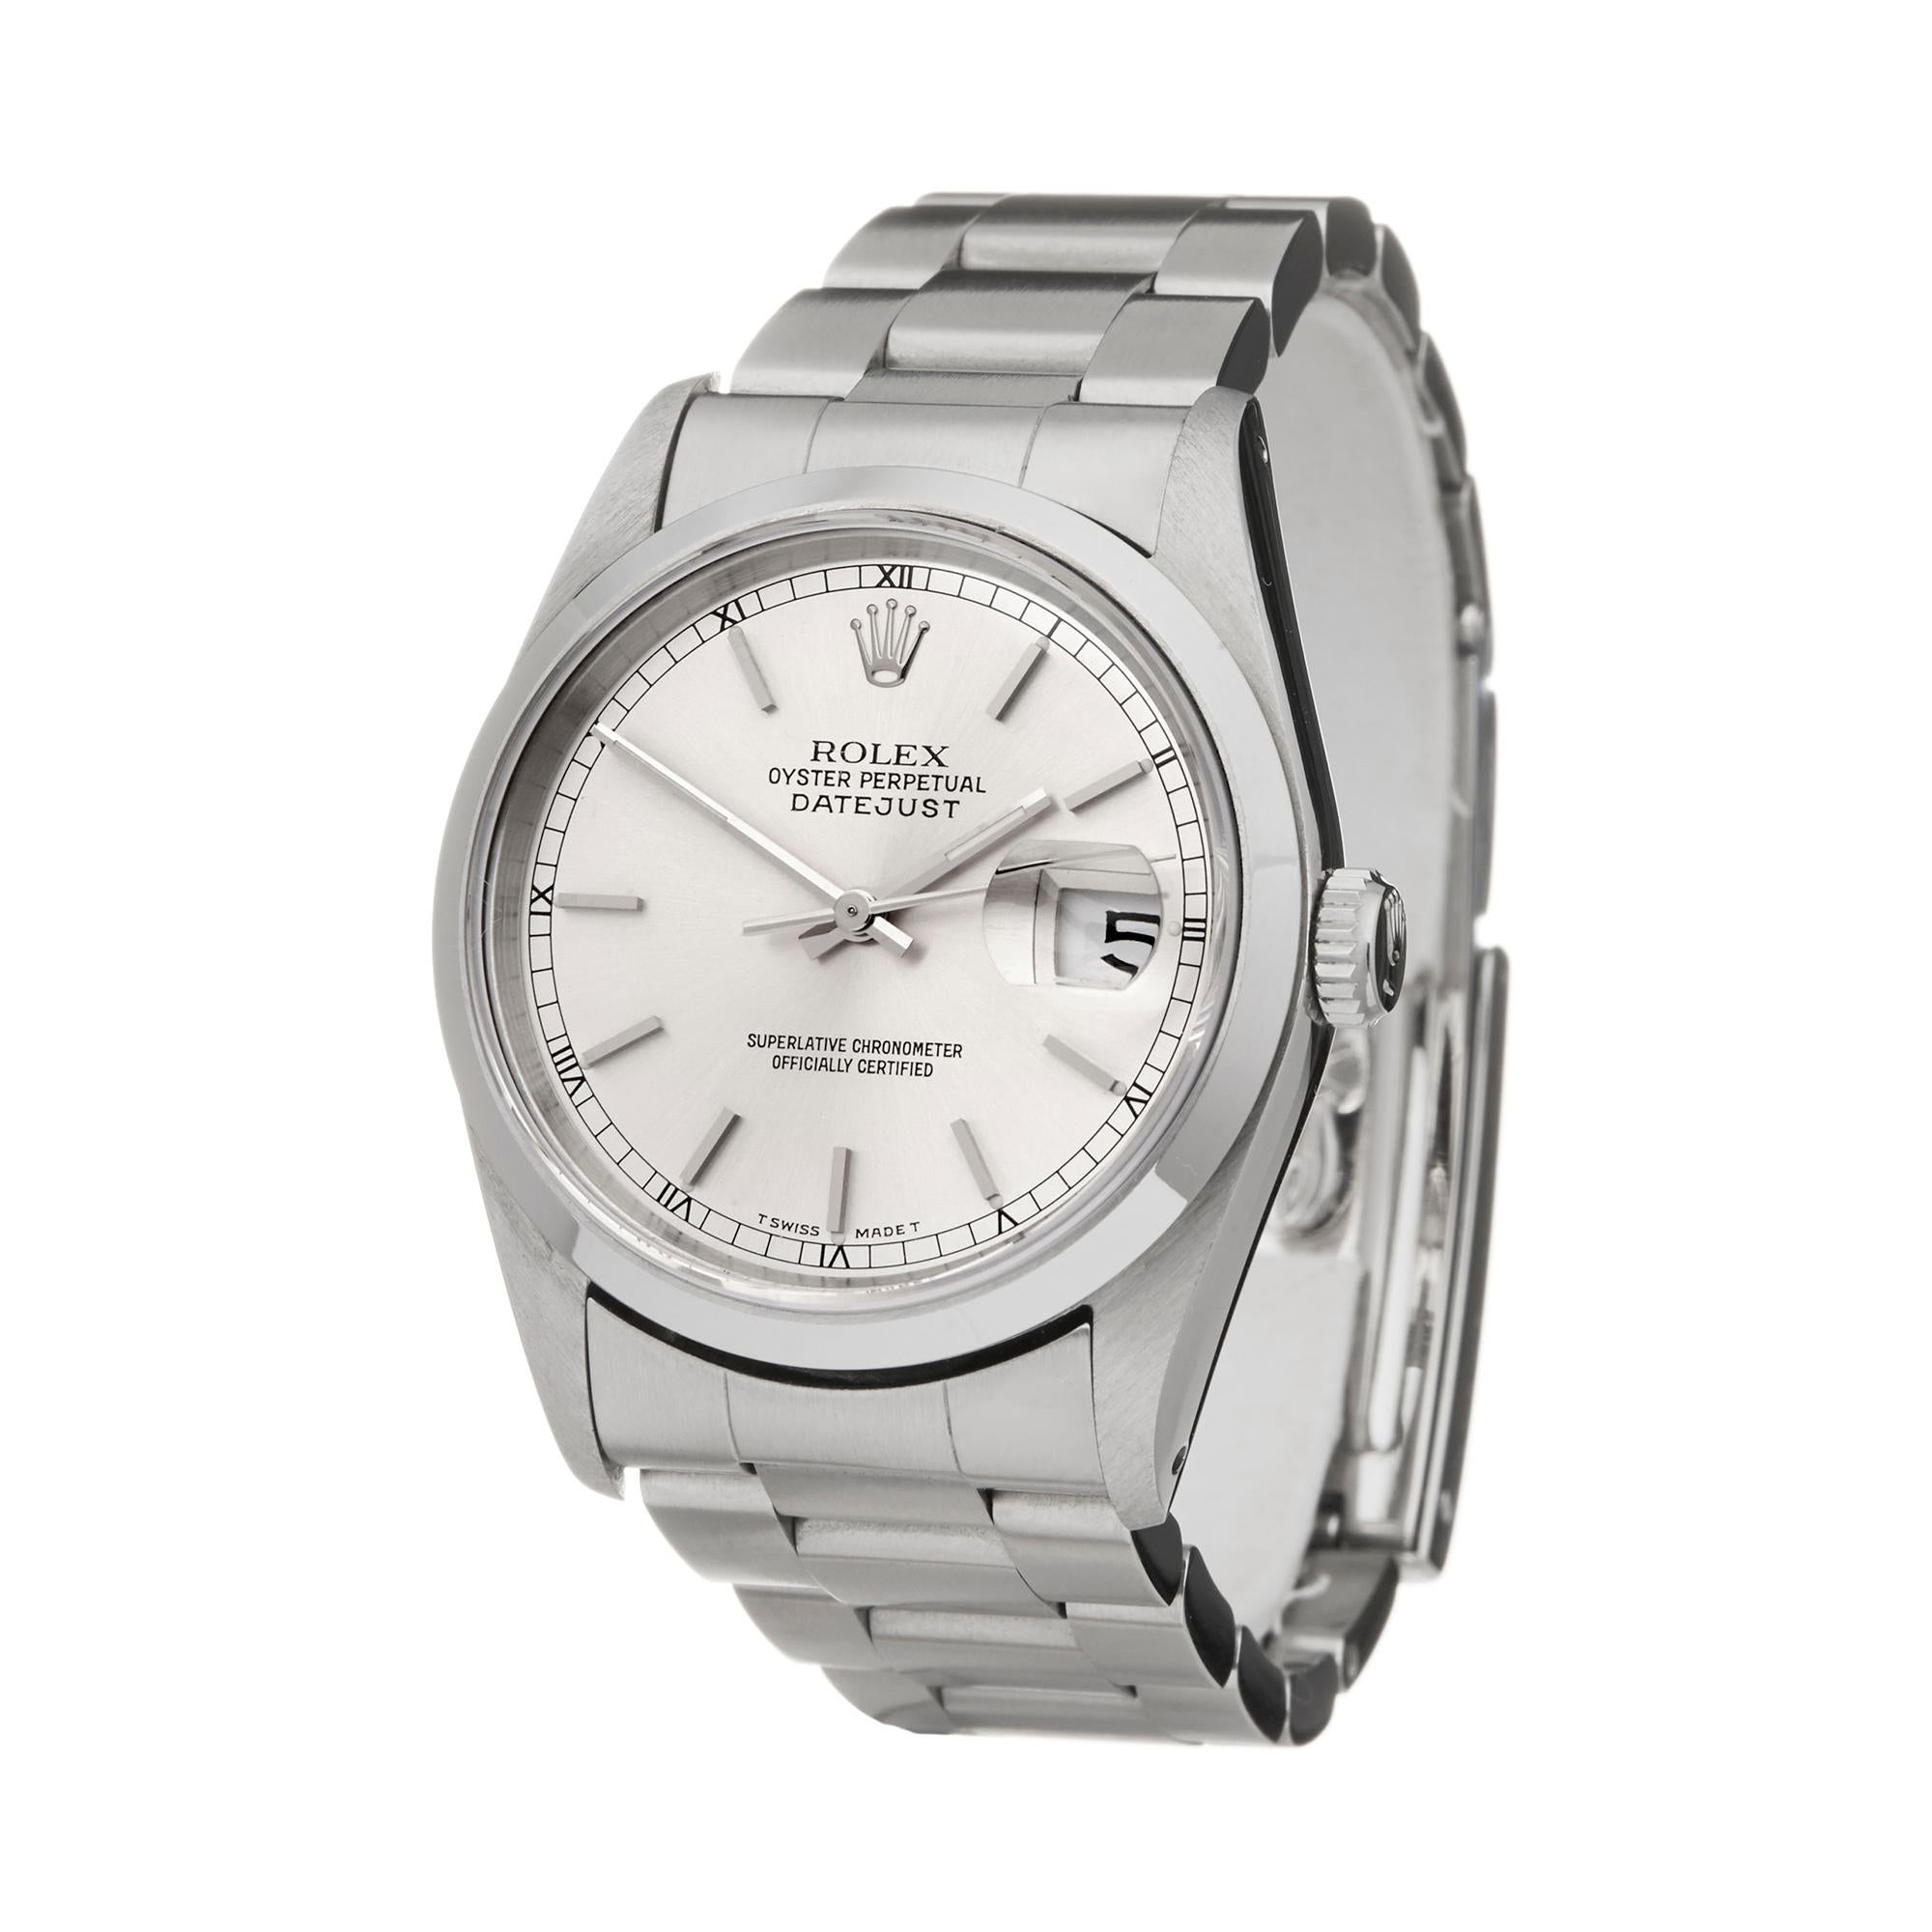 Ref: COM2217
Manufacturer: Rolex
Model: DateJust
Model Ref: 16220
Age: 6th January 1993
Gender: Mens
Complete With: Box & Guarantee
Dial: Silver Baton
Glass: Sapphire Crystal
Movement: Automatic
Water Resistance: To Manufacturers